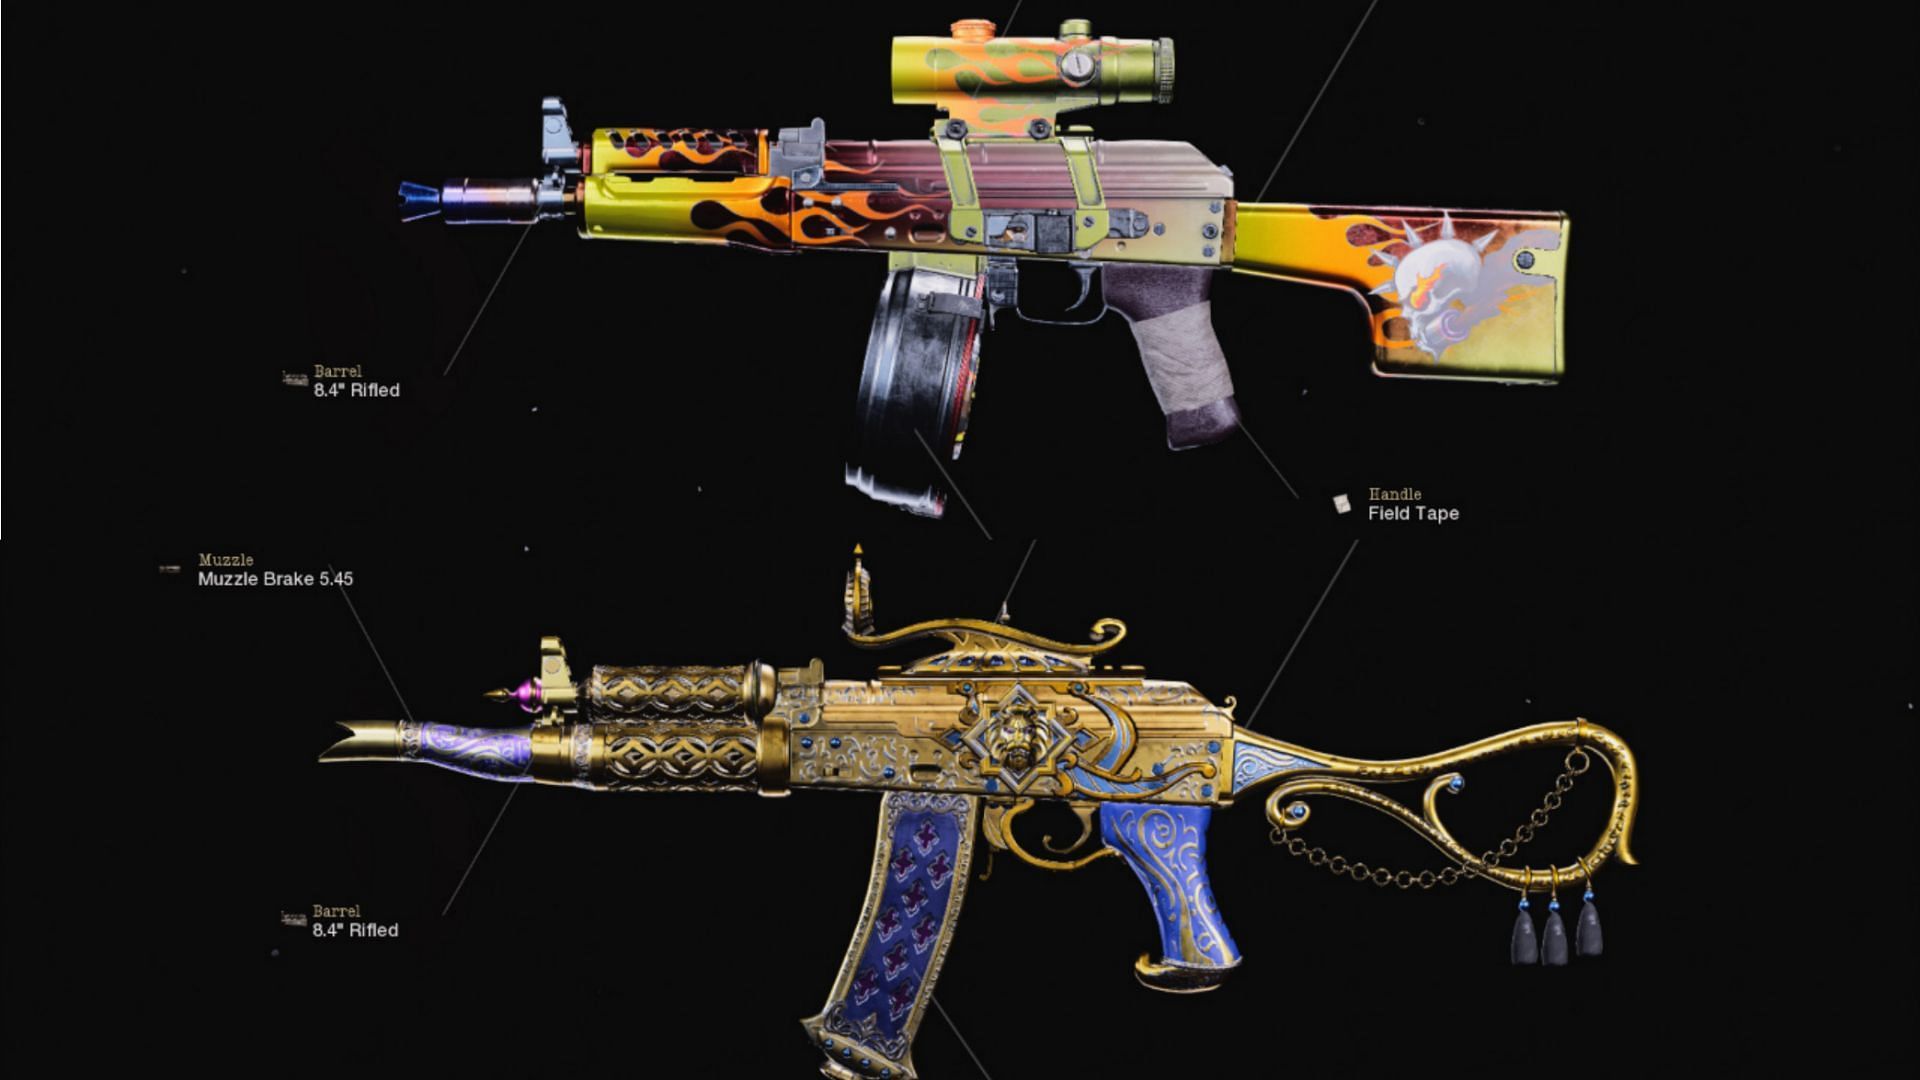 Some available blueprints for the AK-74u SMG in-game (Image via Warzone/Activision)